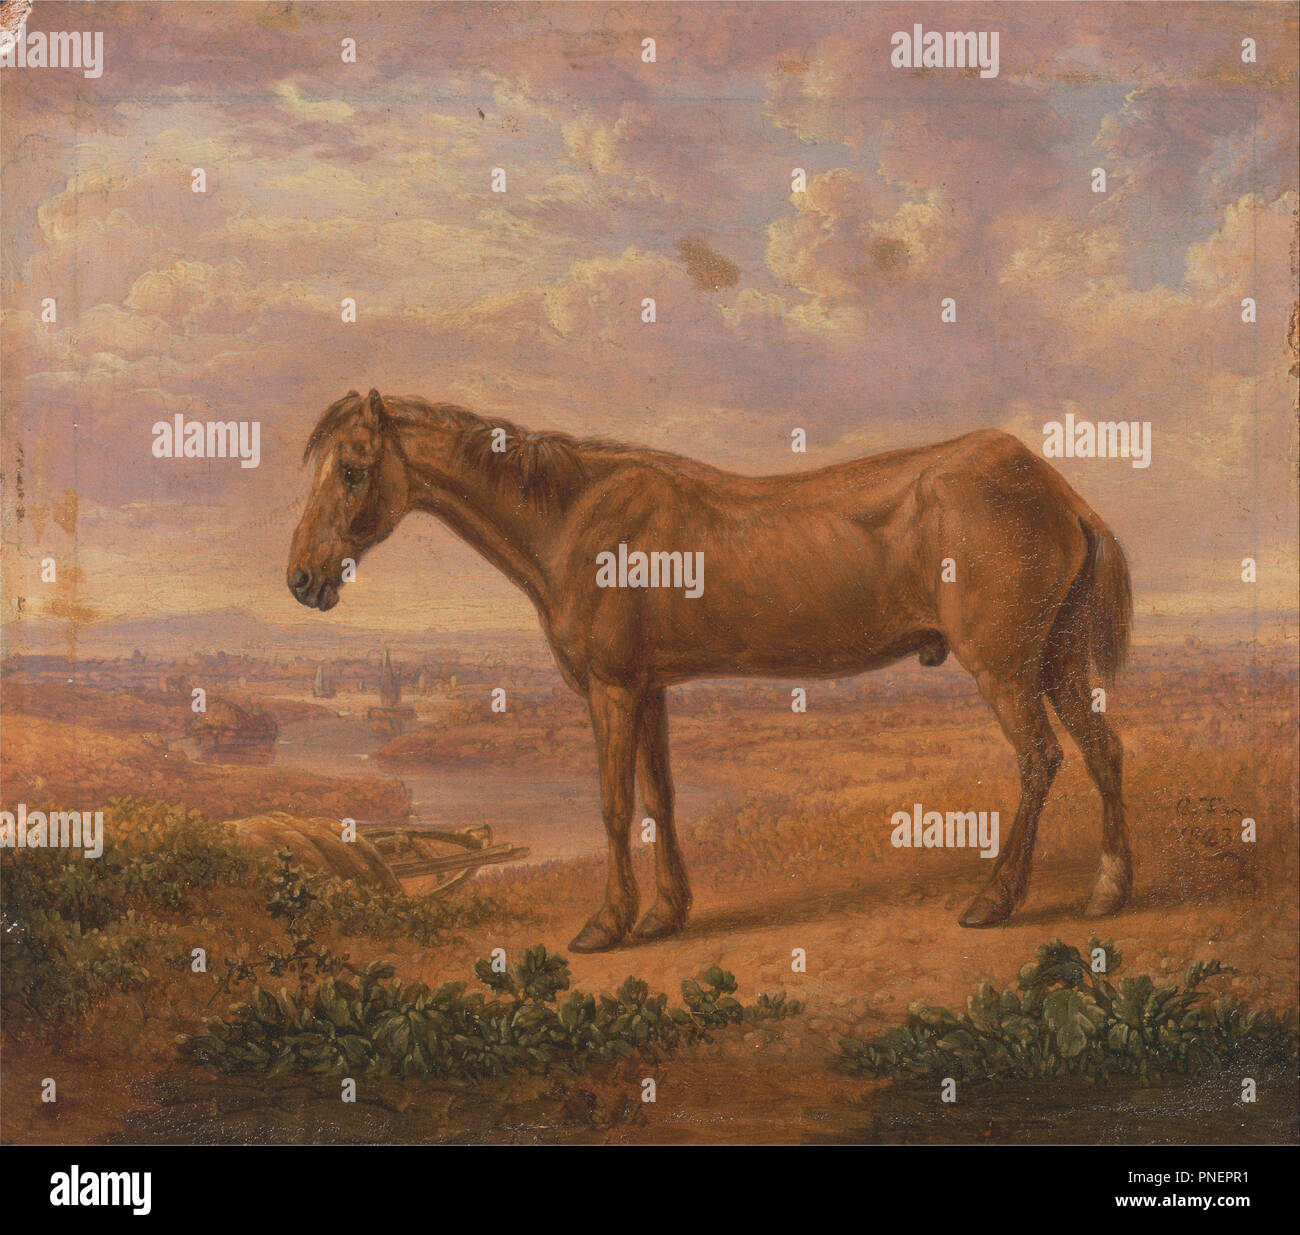 https://c8.alamy.com/comp/PNEPR1/old-billy-a-draught-horse-aged-62-dateperiod-1823-painting-oil-on-panel-height-102-mm-401-in-width-111-mm-437-in-author-charles-towne-PNEPR1.jpg